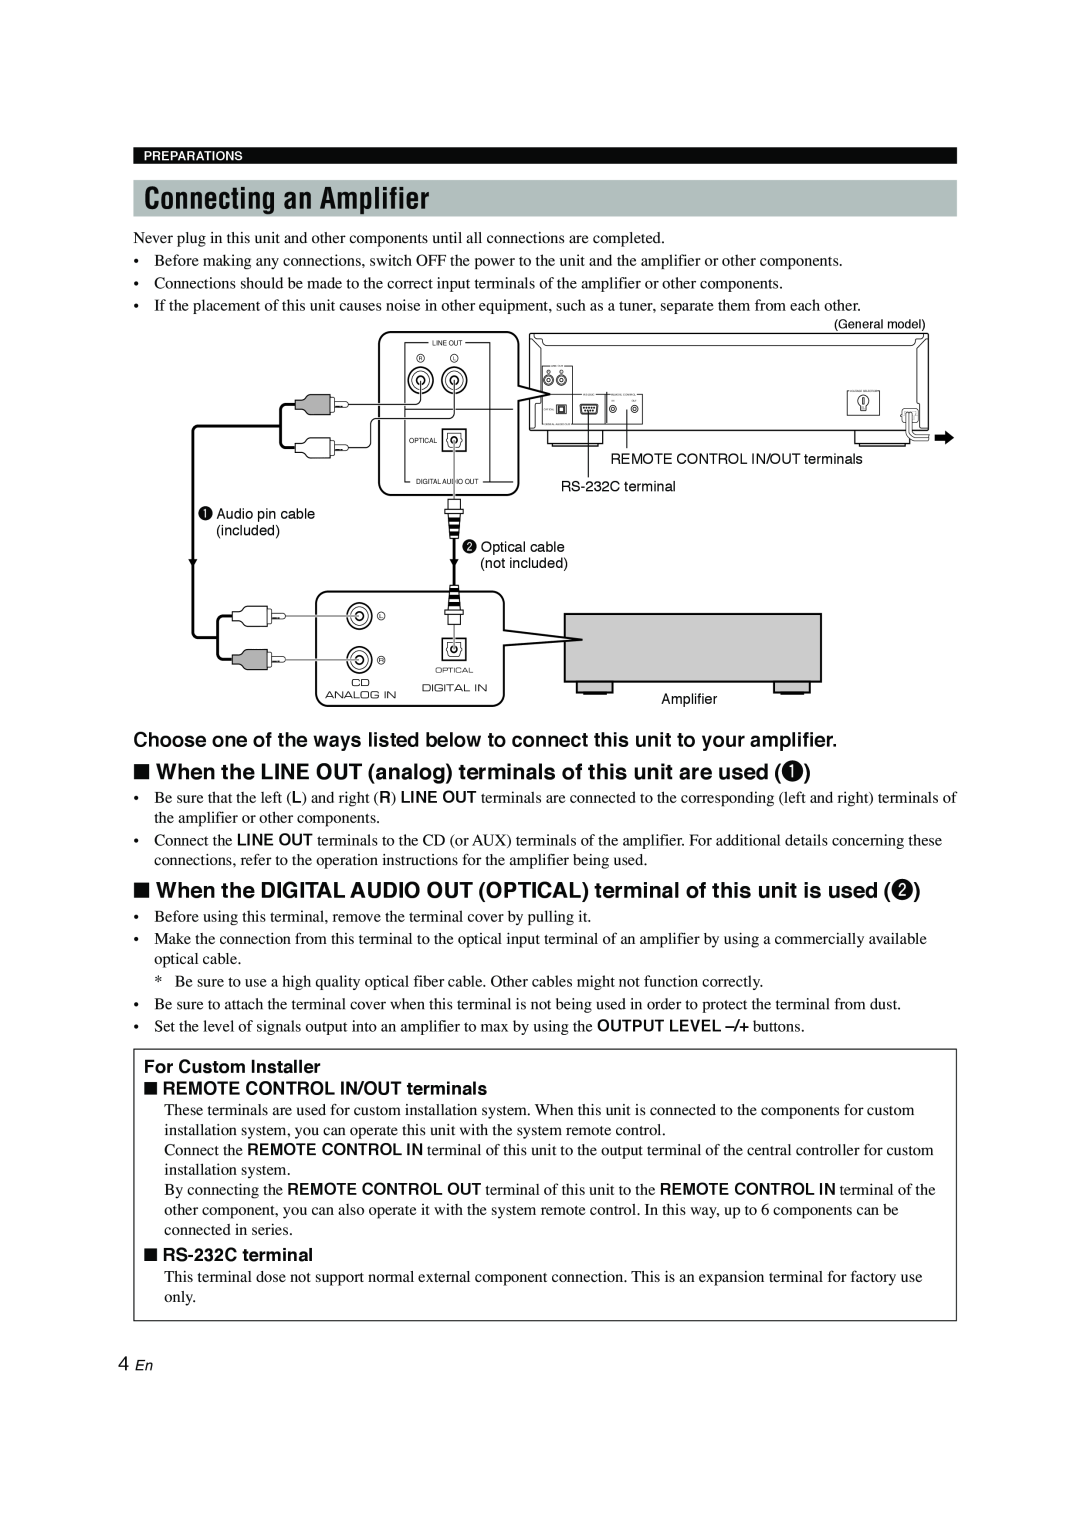 Yamaha CDC-697 owner manual Connecting an Amplifier, For Custom Installer, REMOTE CONTROL IN/OUT terminals, RS-232Cterminal 